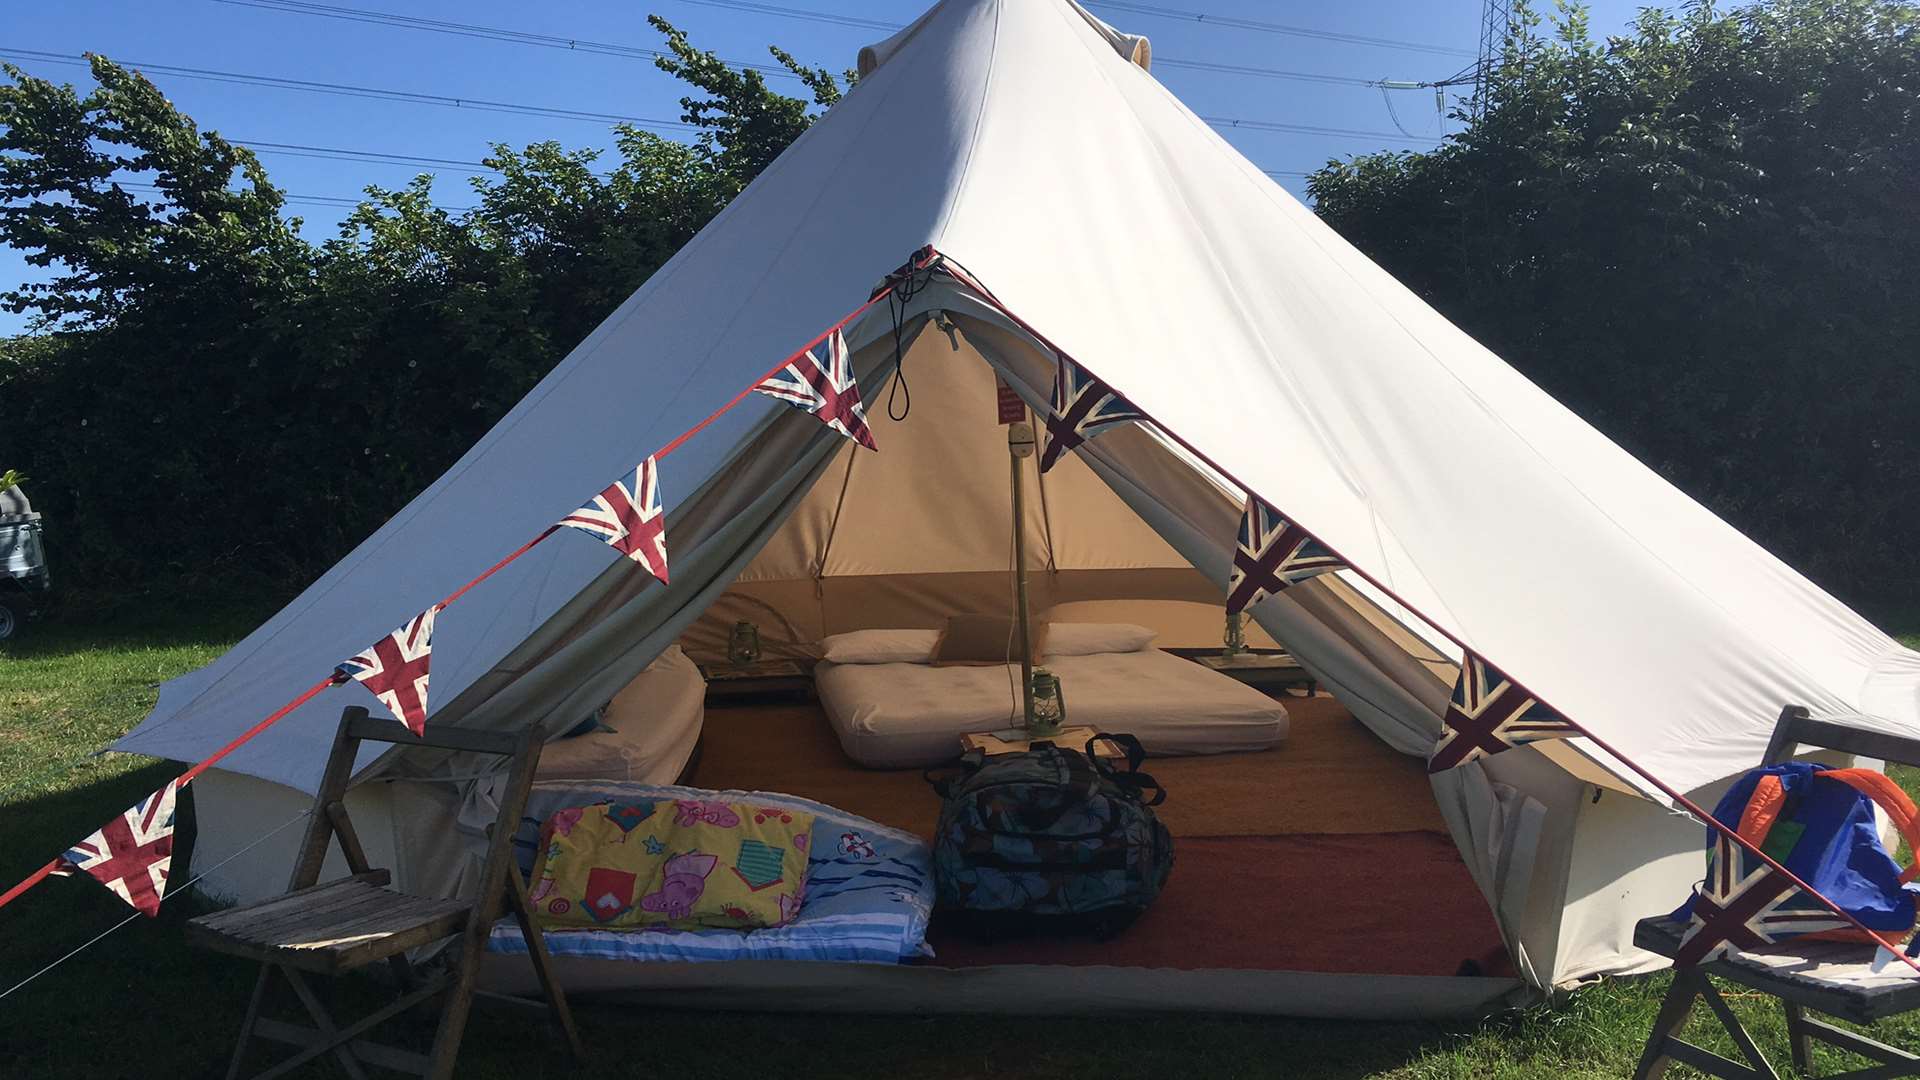 Our glamorous bell tent in Dorset